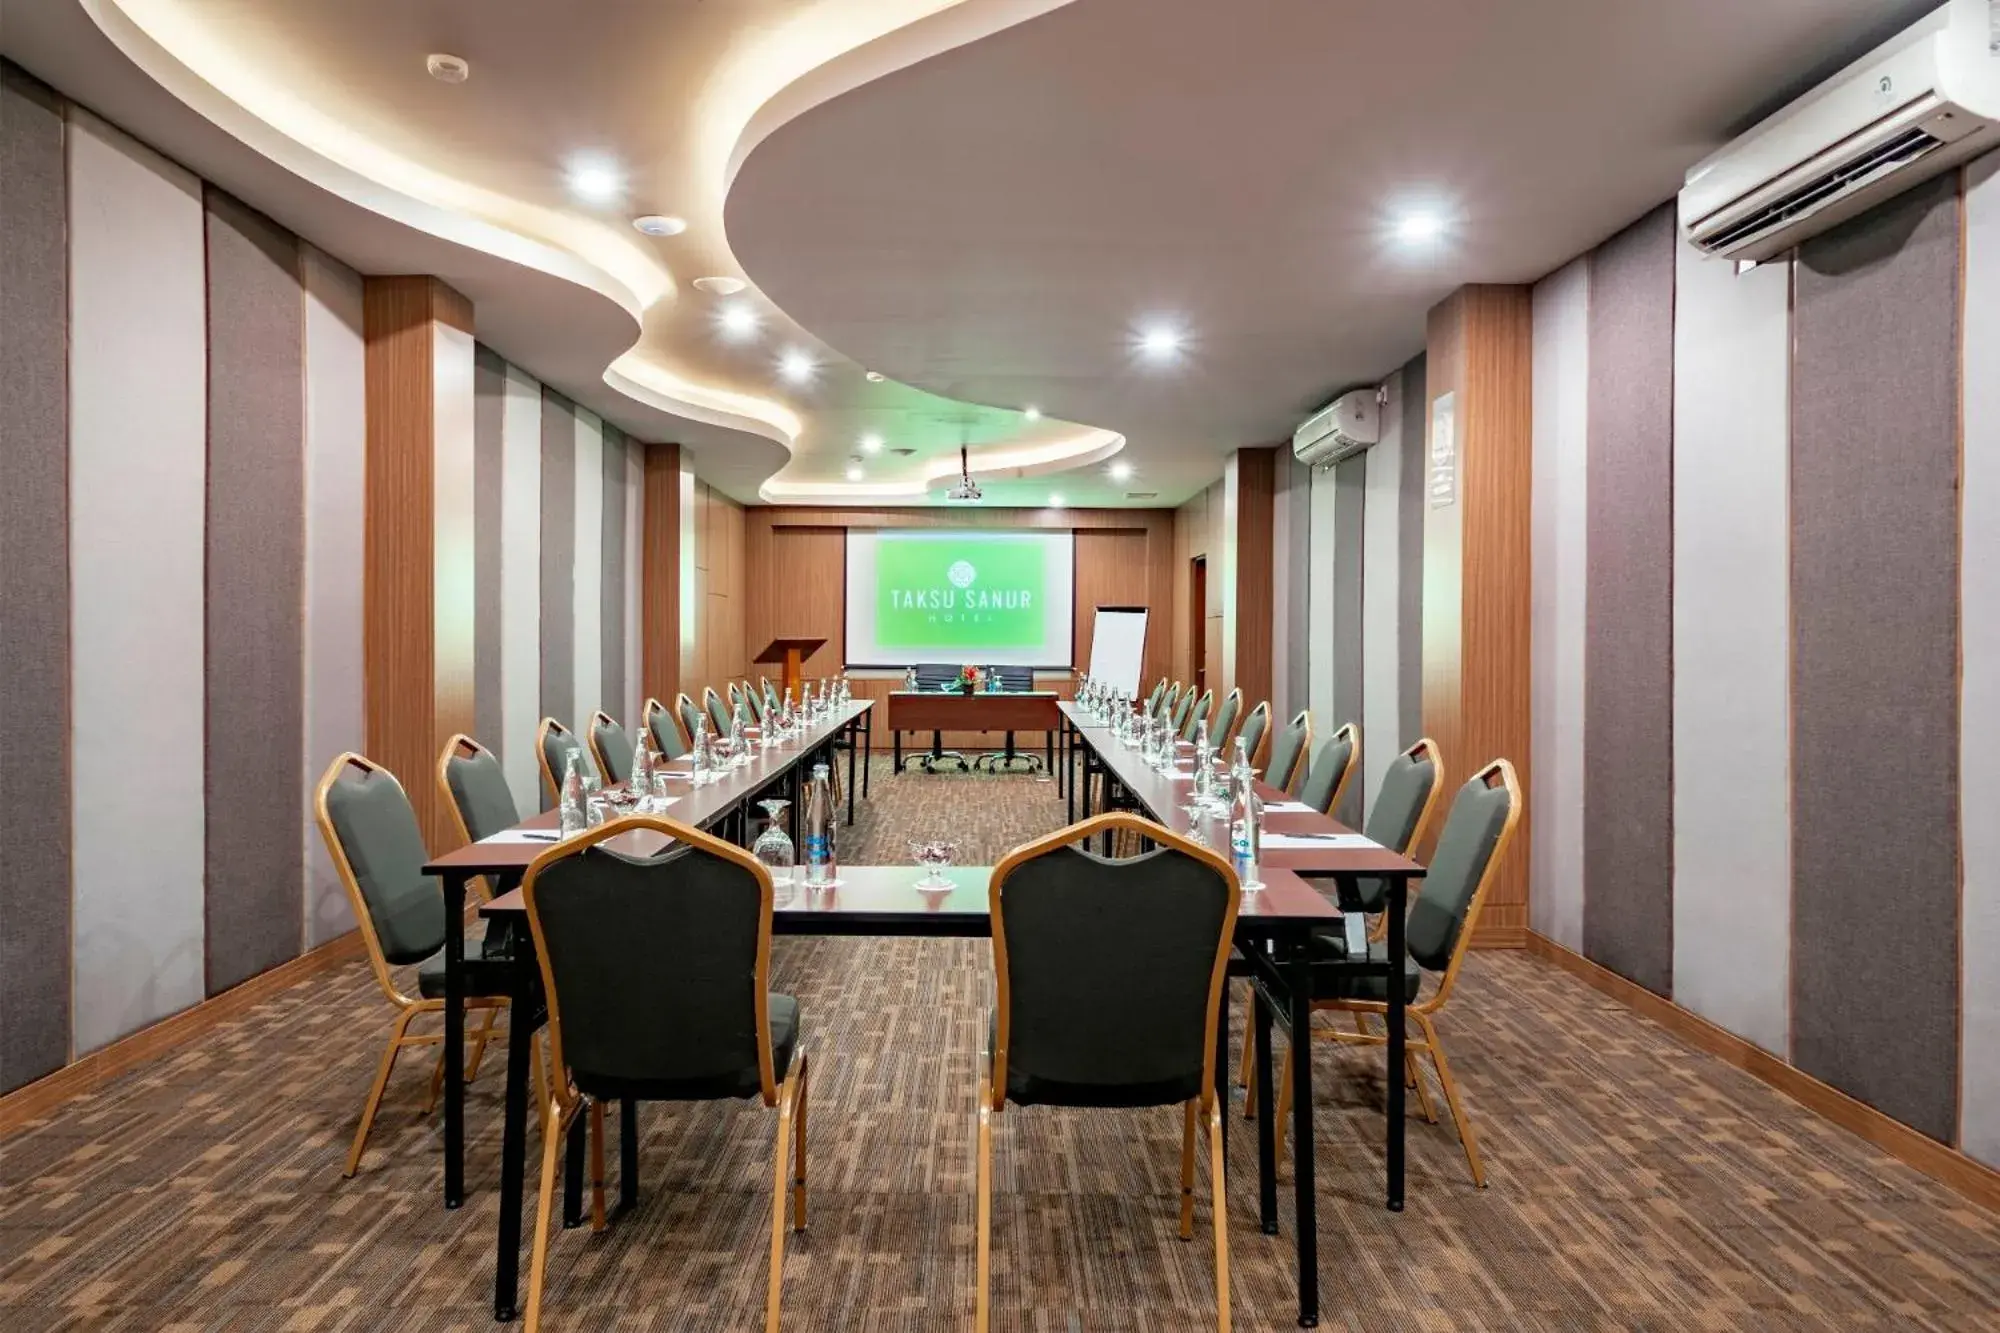 Meeting/conference room in Taksu Sanur Hotel